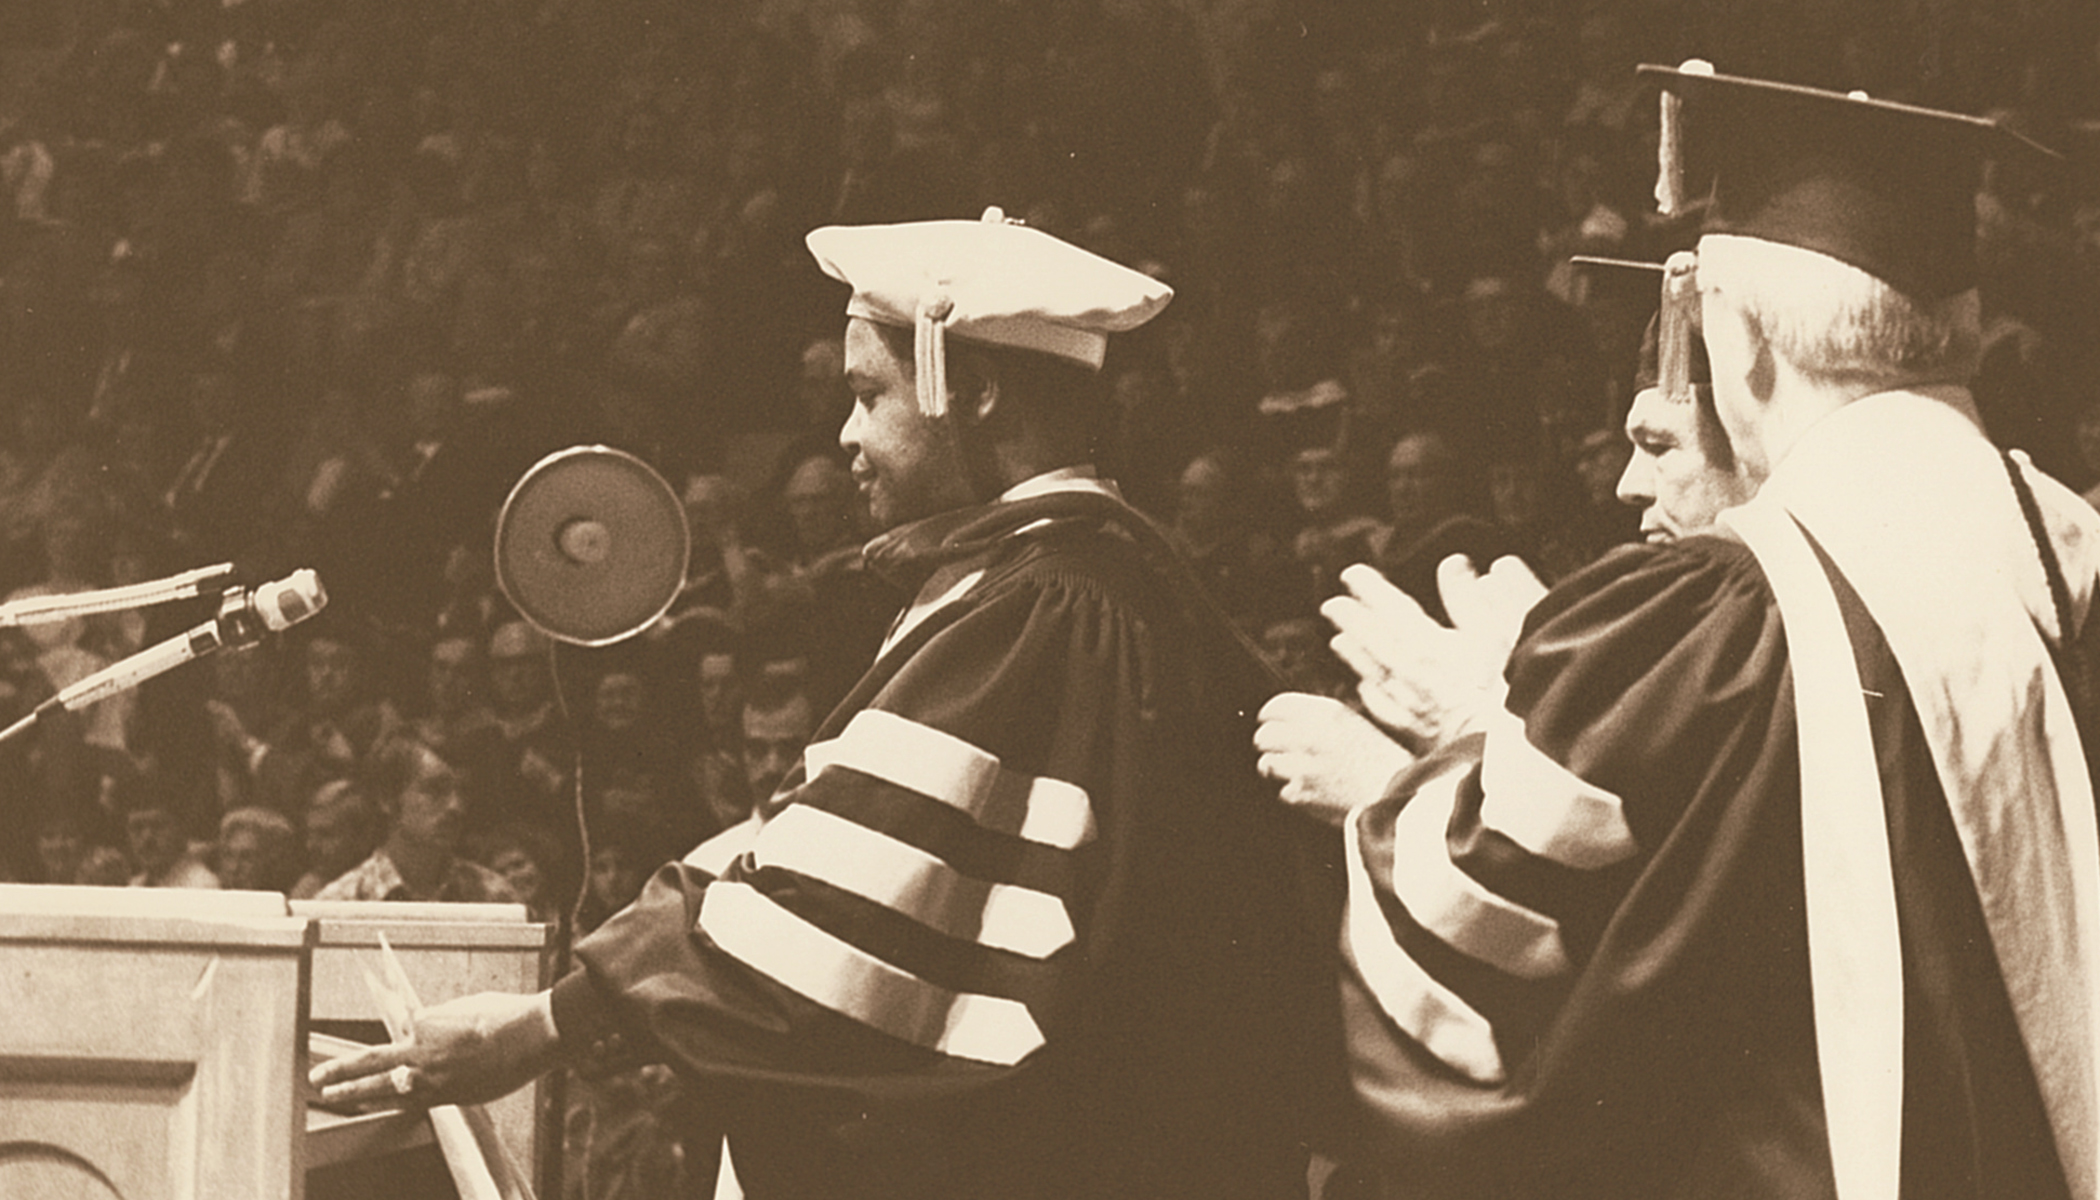 Evans (left) received an honorary Doctor of Laws degree from ACU in May 1970. Board chair Ray McGlothlin Jr. (second from right) and president Dr. Willliam J. Teague (right) officiated at the ceremony.